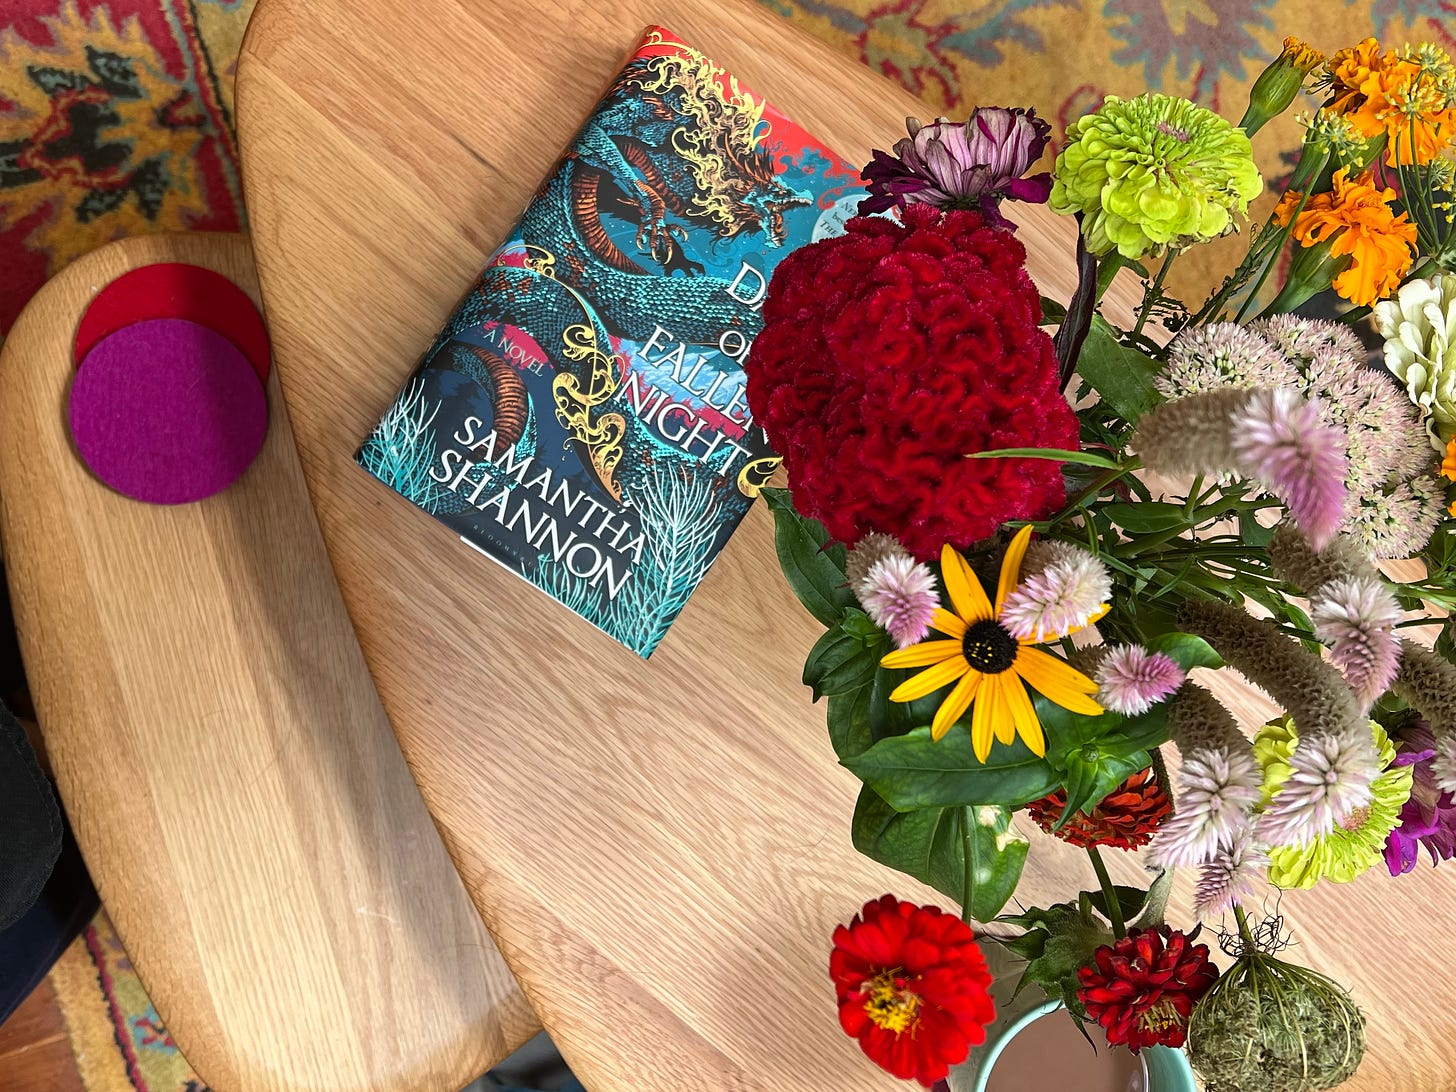 autumn flowers and a book